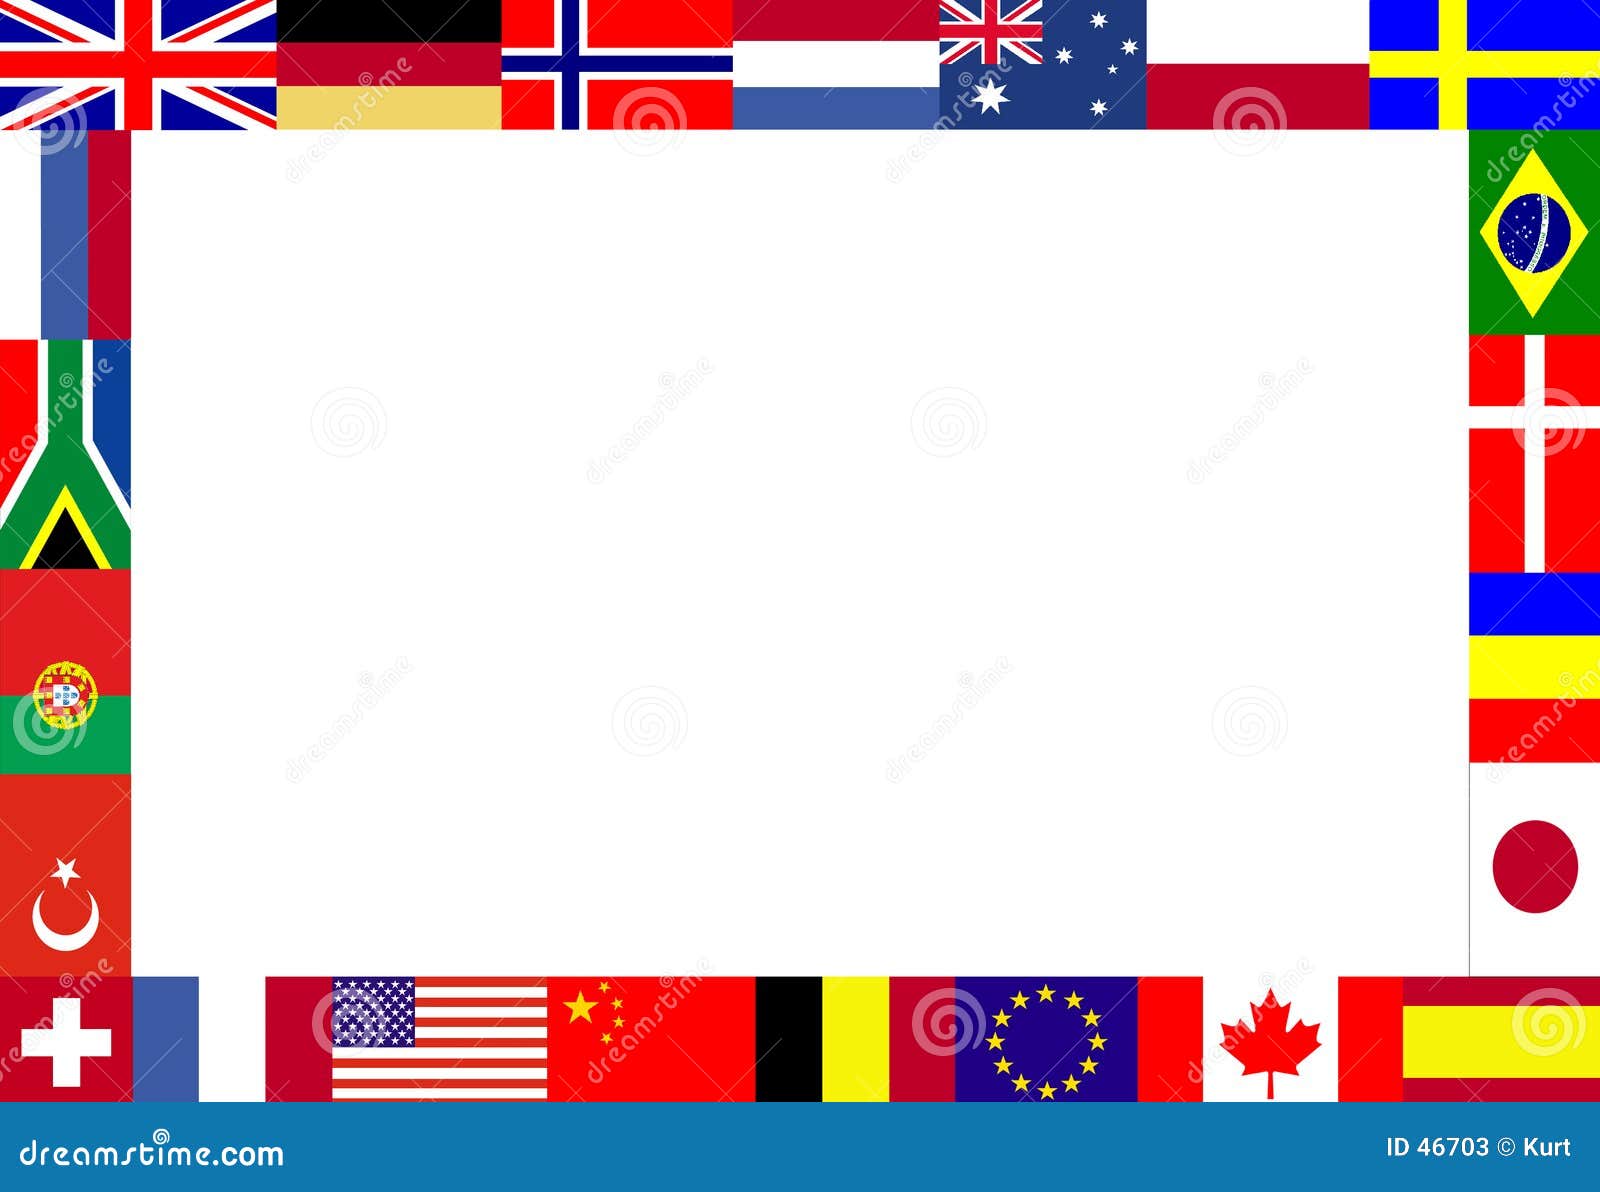 free clipart flags of the world - photo #44